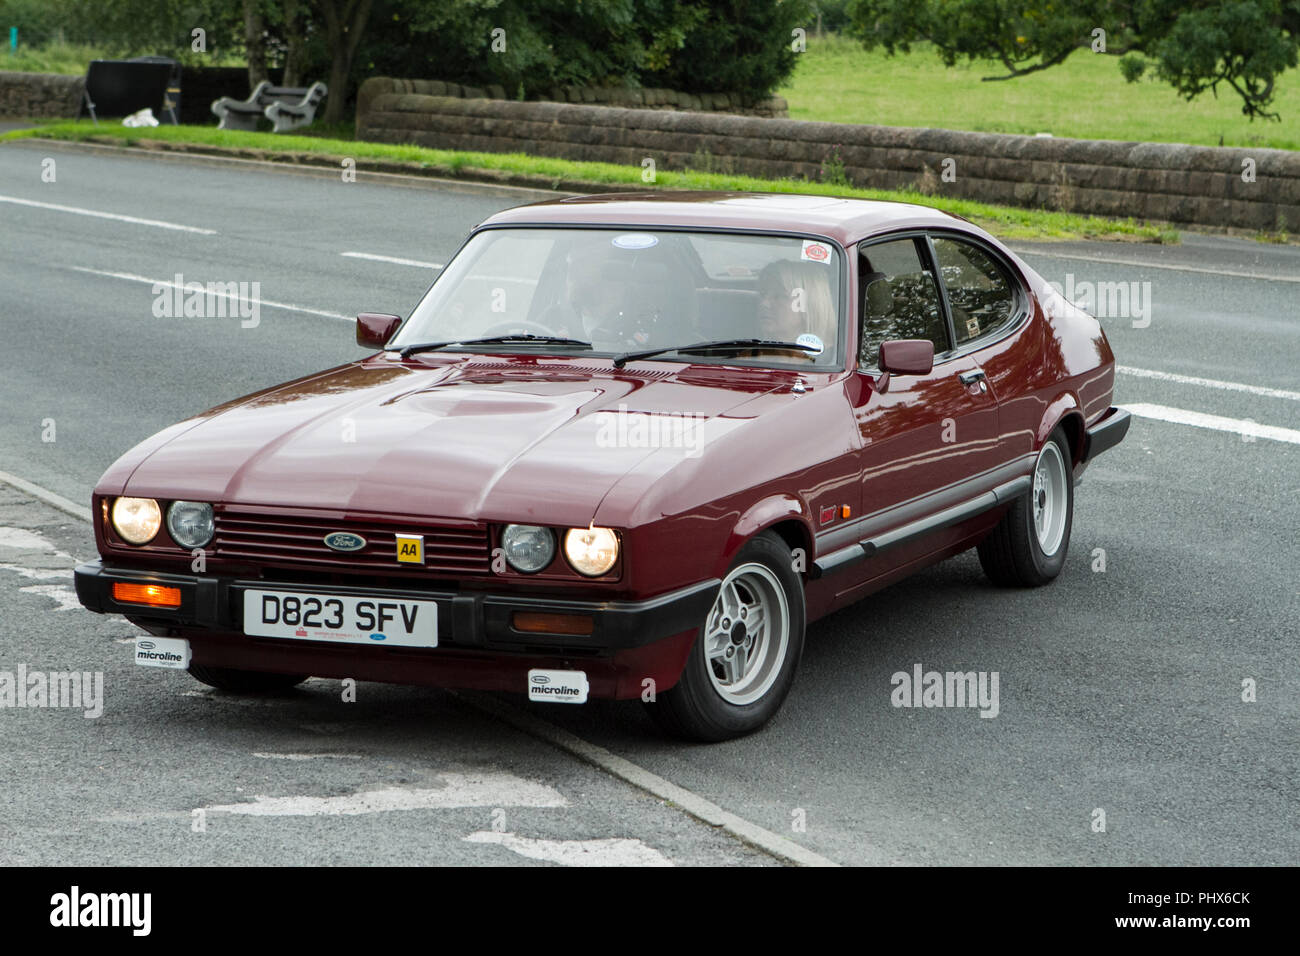 1996 red Ford Capri Laser at Hoghton towers annual classic vintage car rally, UK Stock Photo